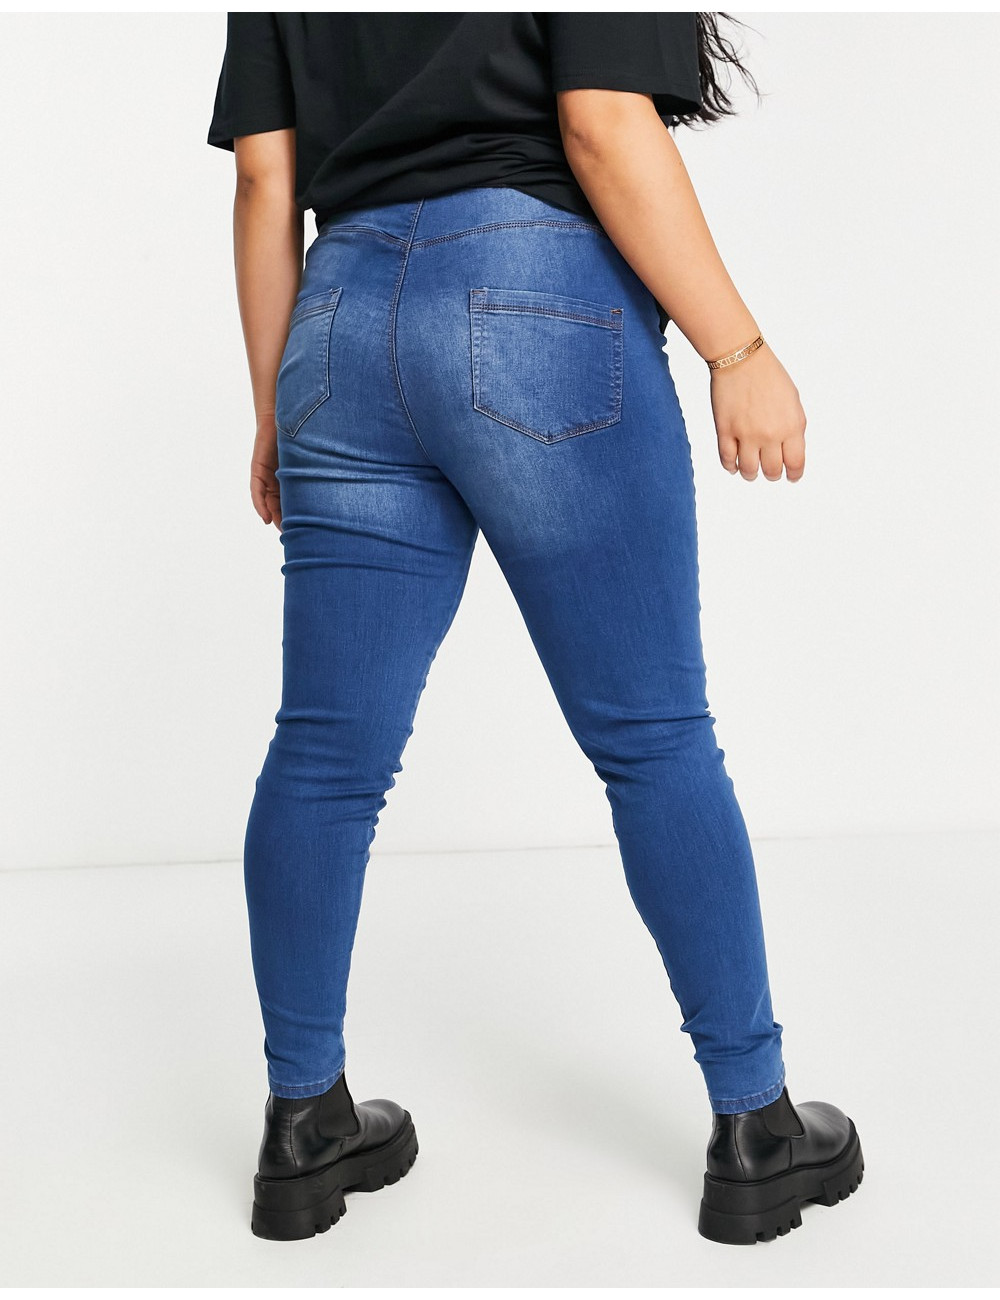 Yours jeggings in mid blue